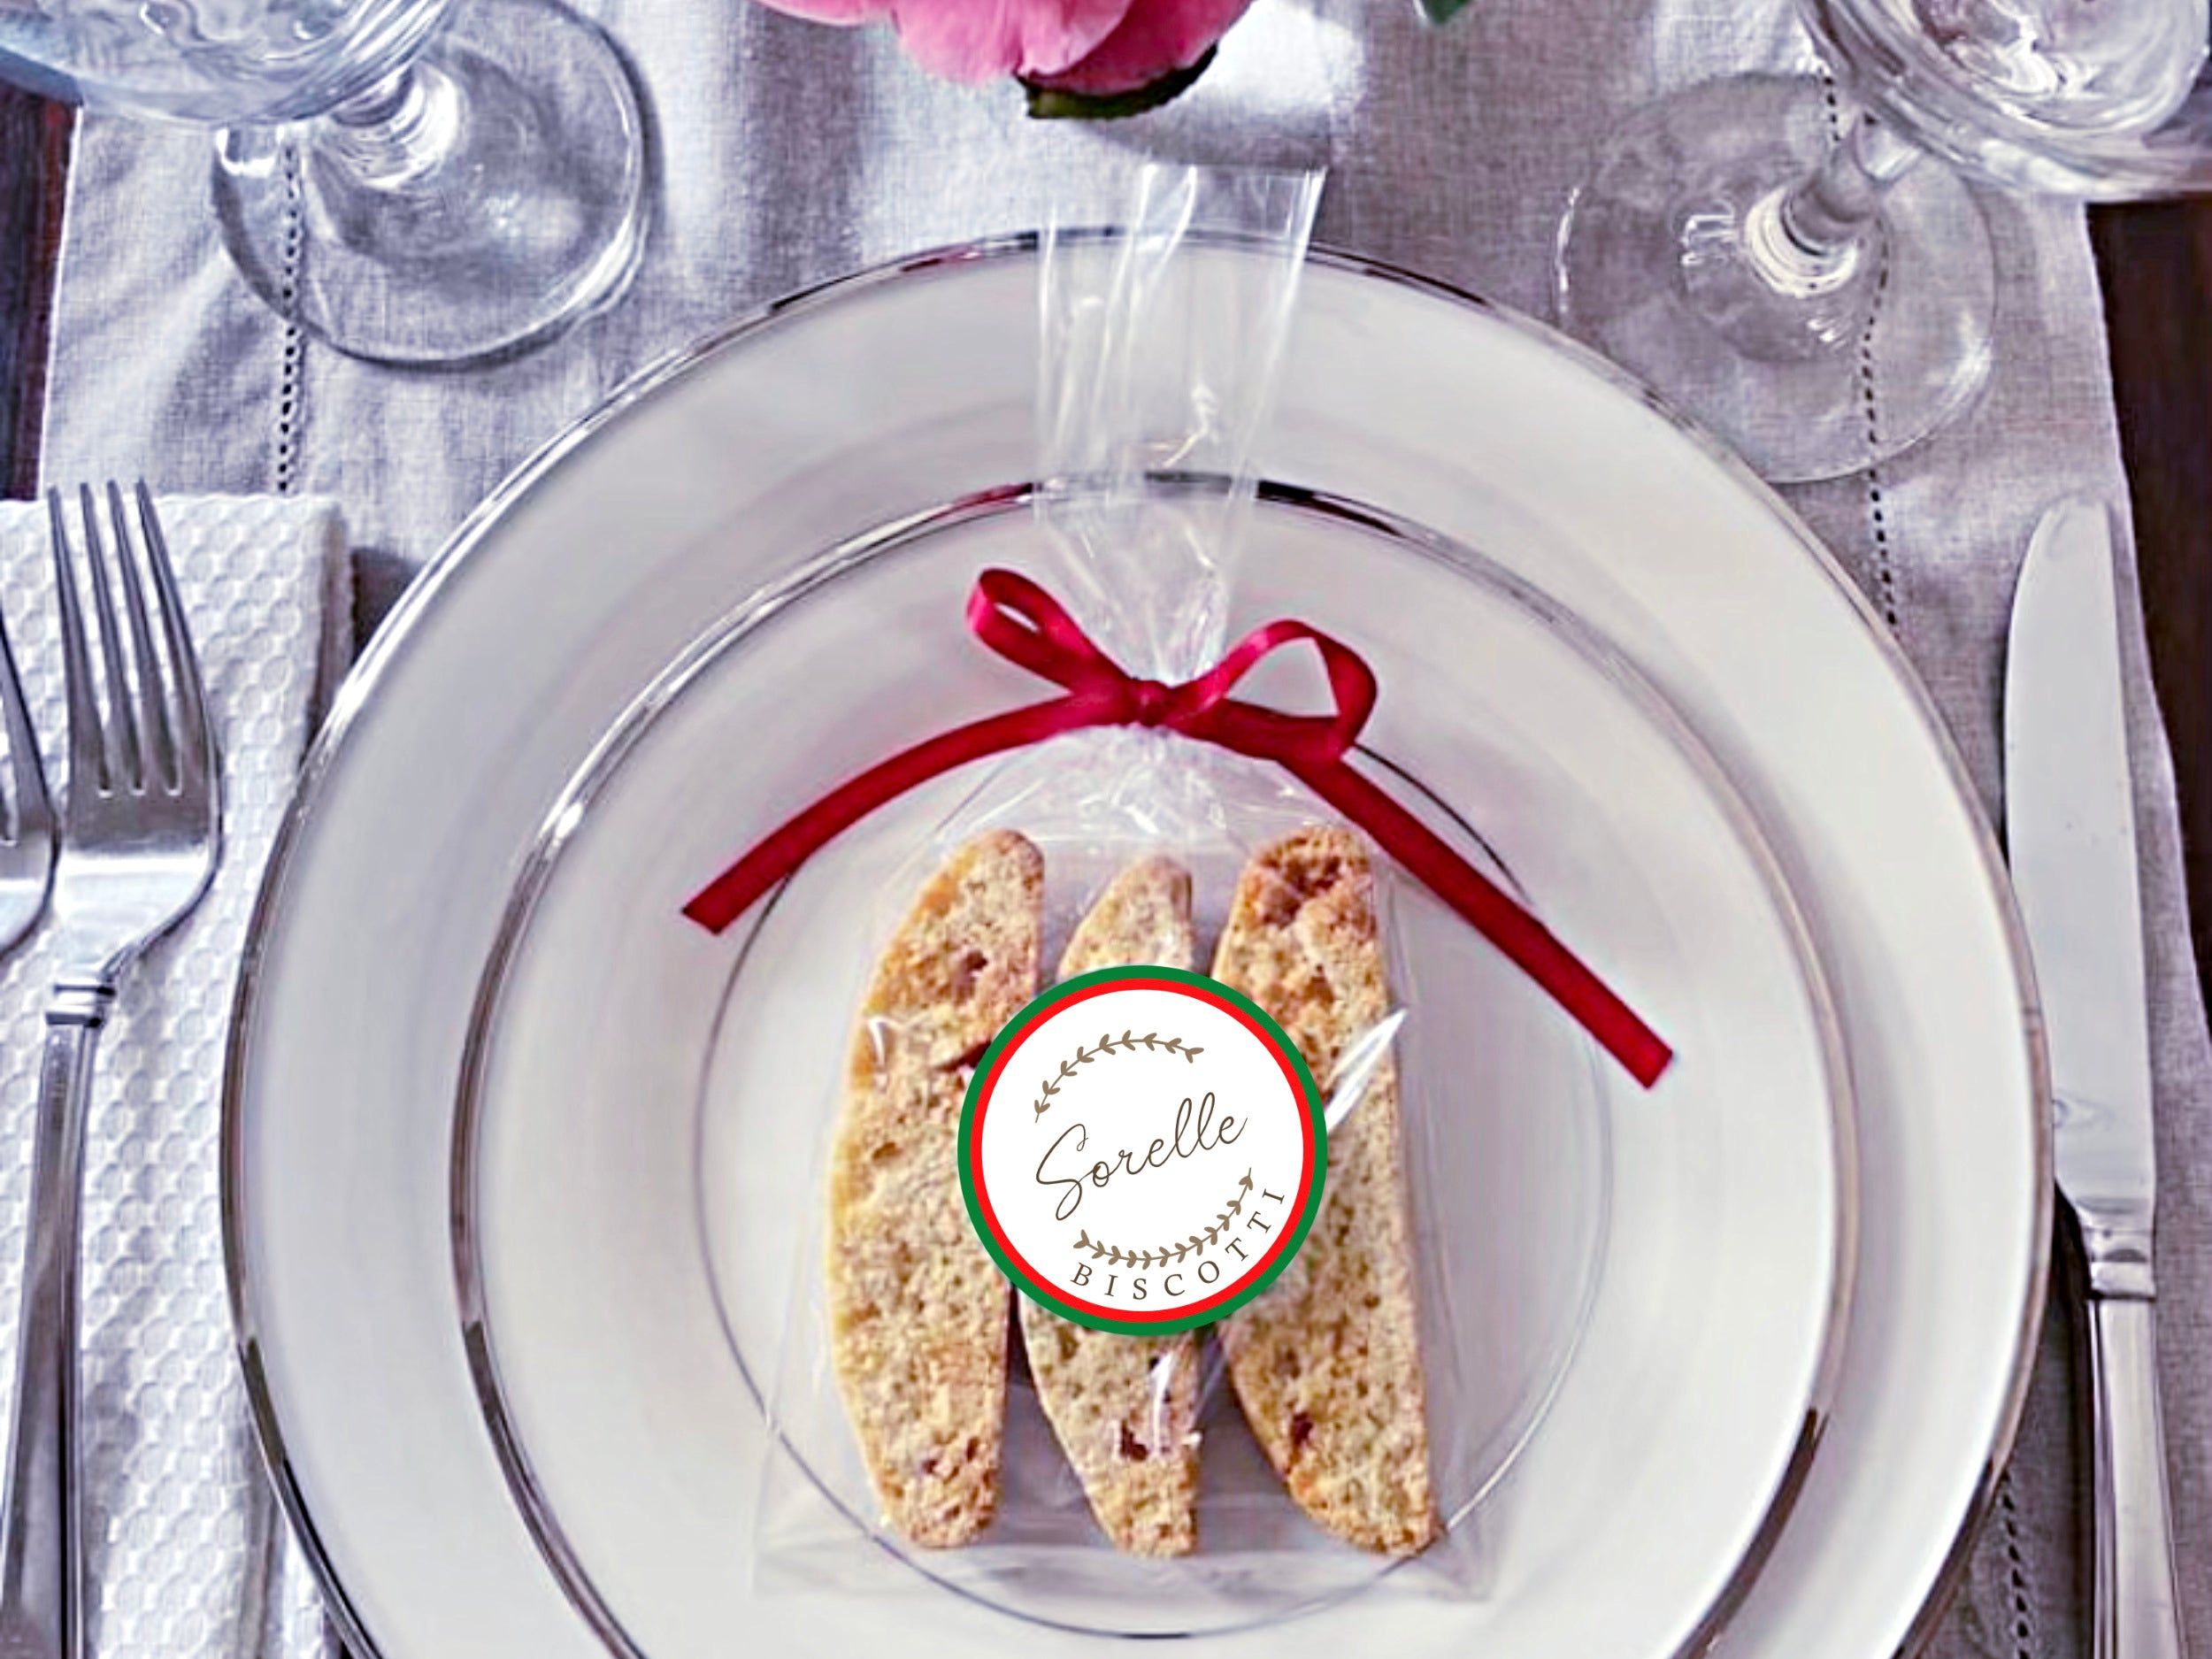 Sorelle Biscotti LLC 3 pack biscotti on plate setting. Perfect for gifts or favors!